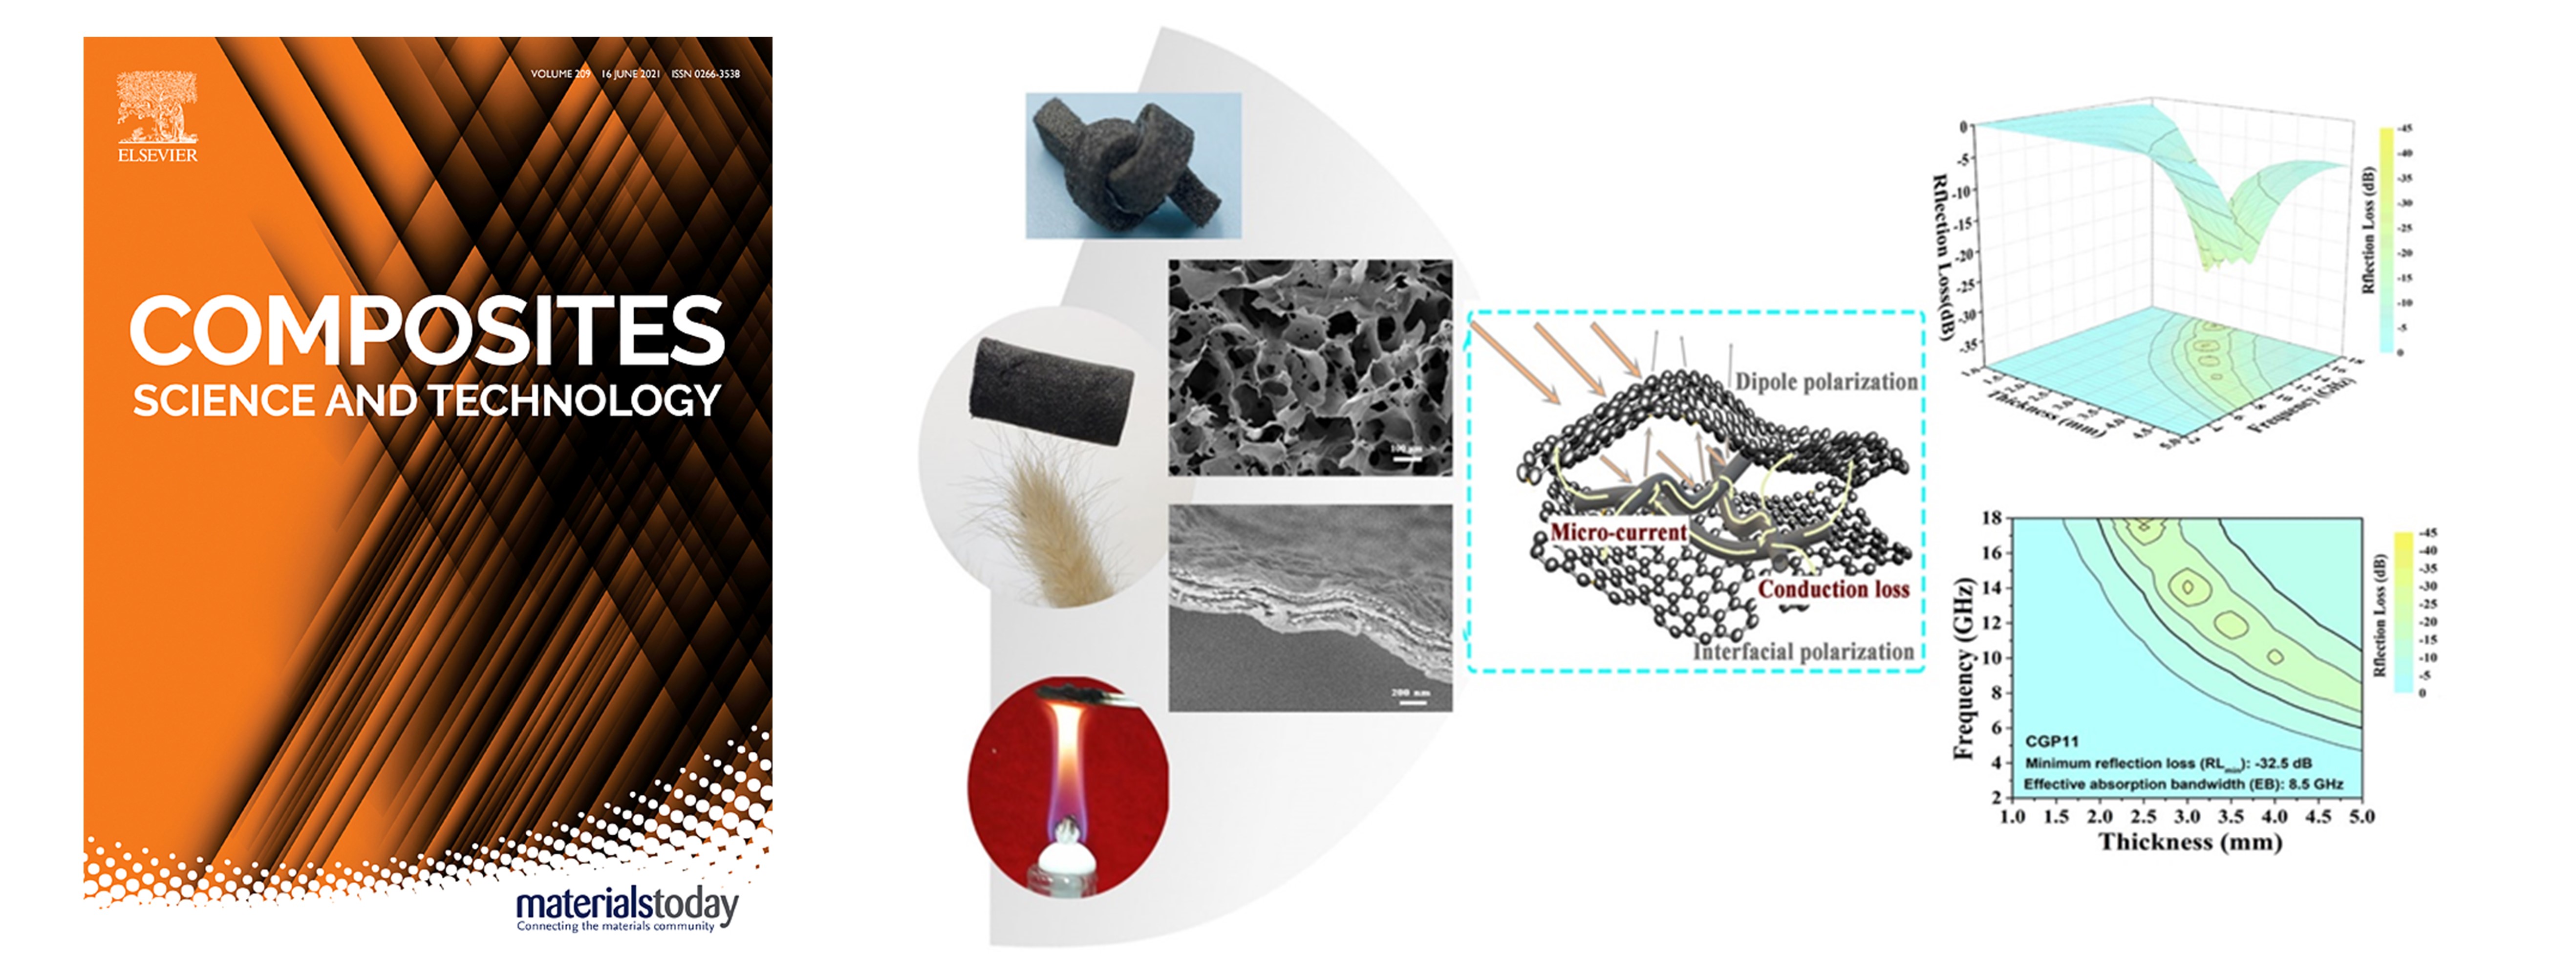 Flexible and heat-resistant carbon nanotube/graphene/polyimide foam for broadband microwave absorption